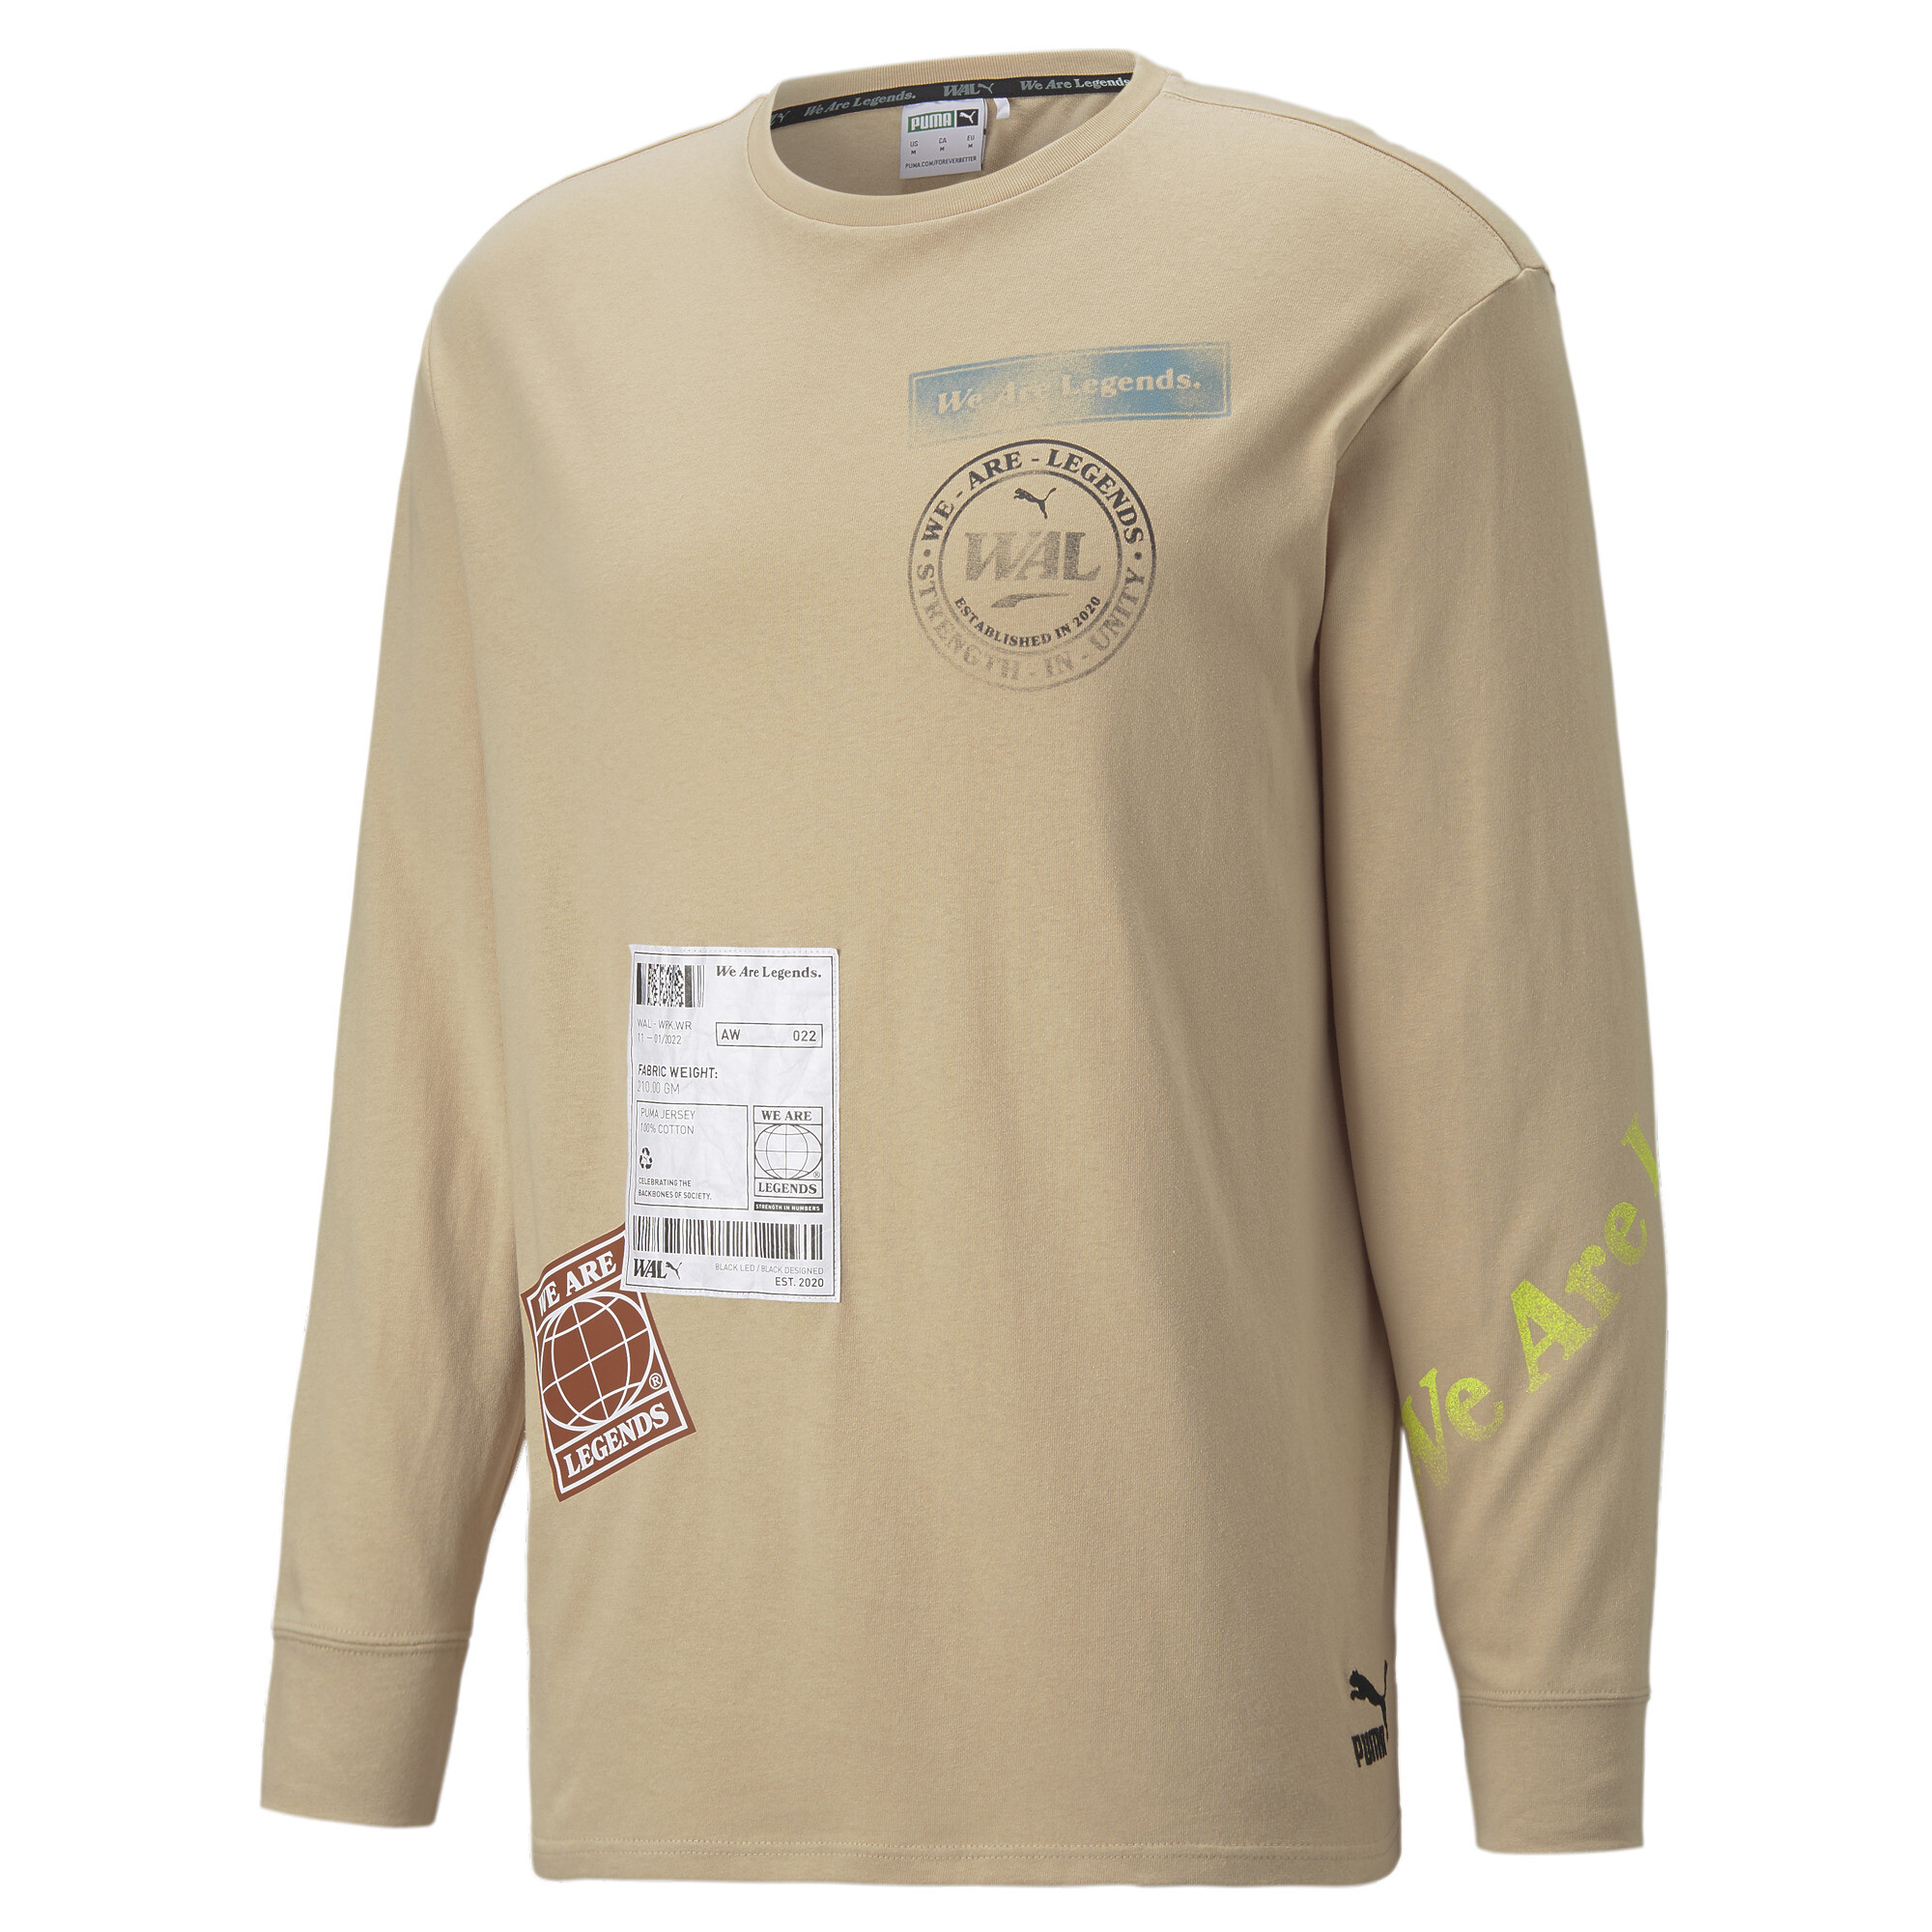 Men's PUMA We Are Legends Long Sleeve T-Shirt In Beige, Size Large